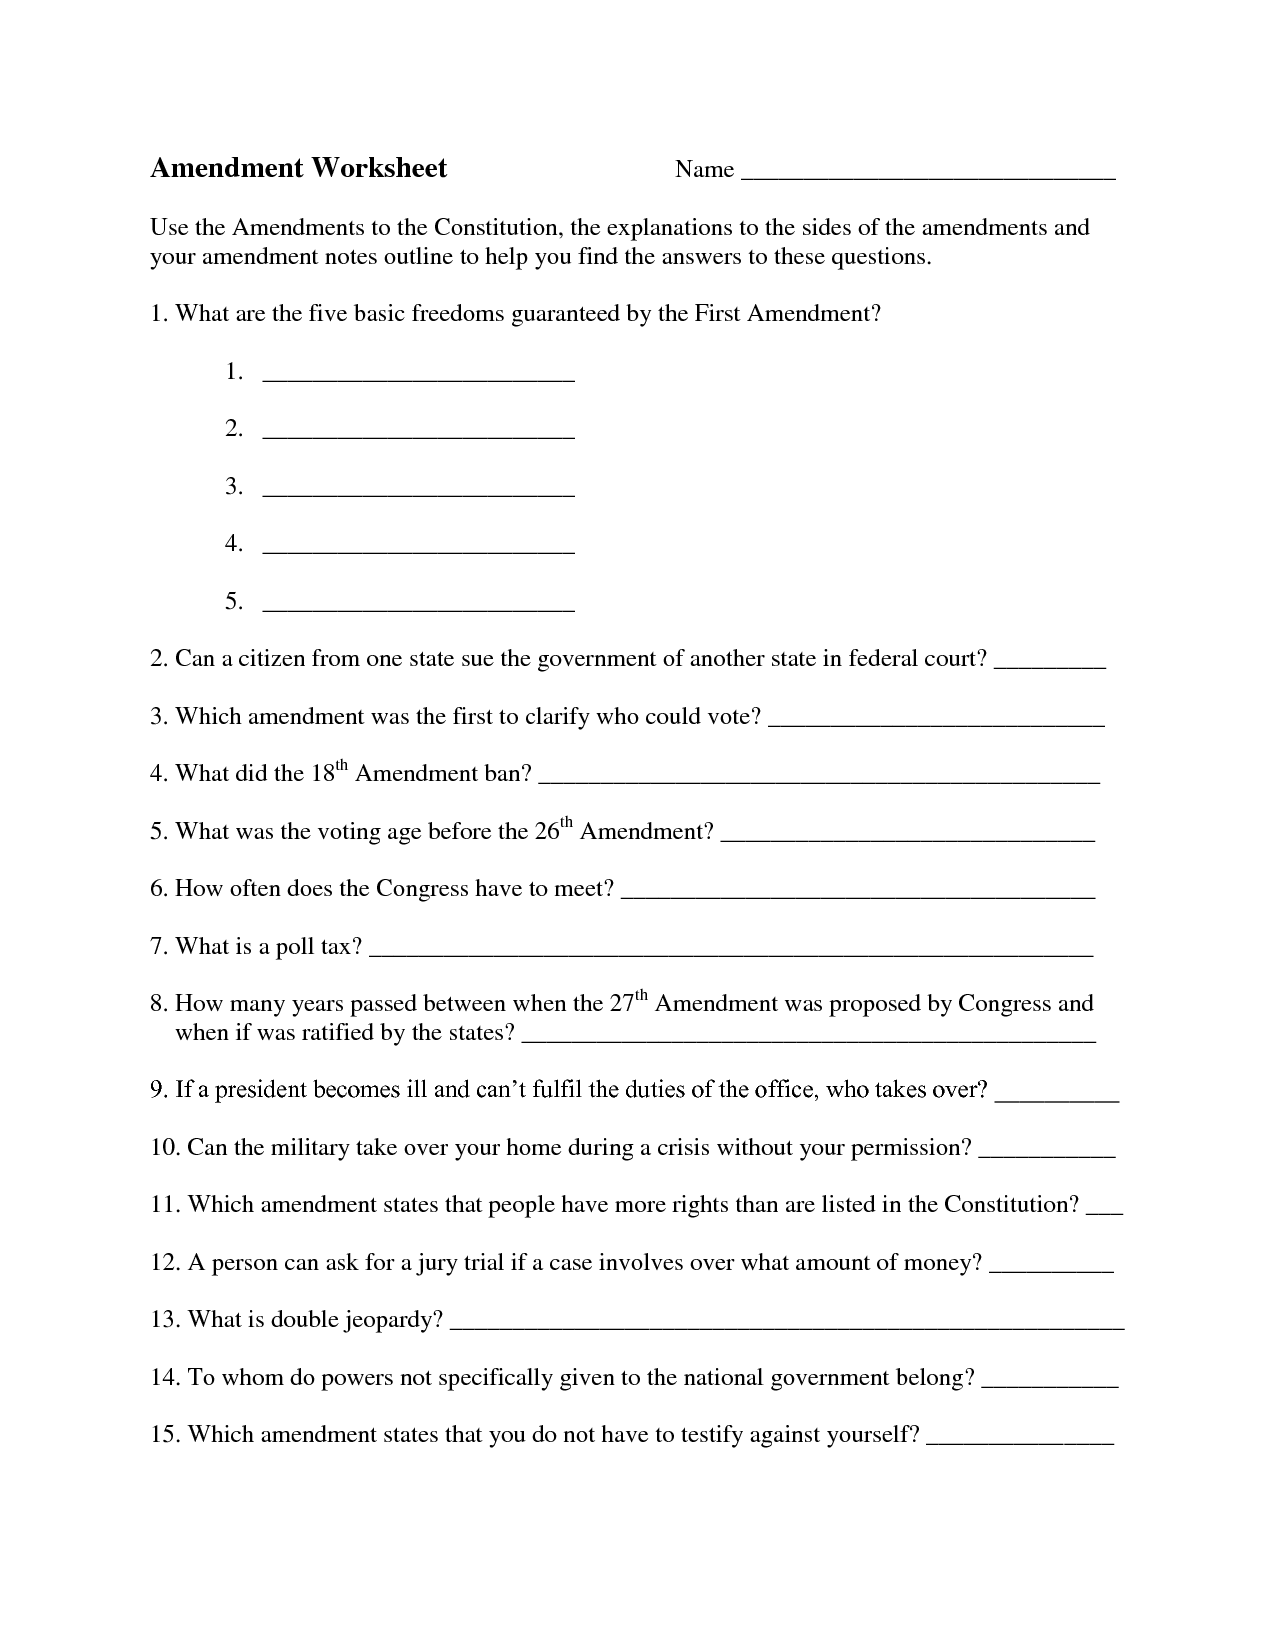 Amendments to the Constitution Worksheet Answers Image